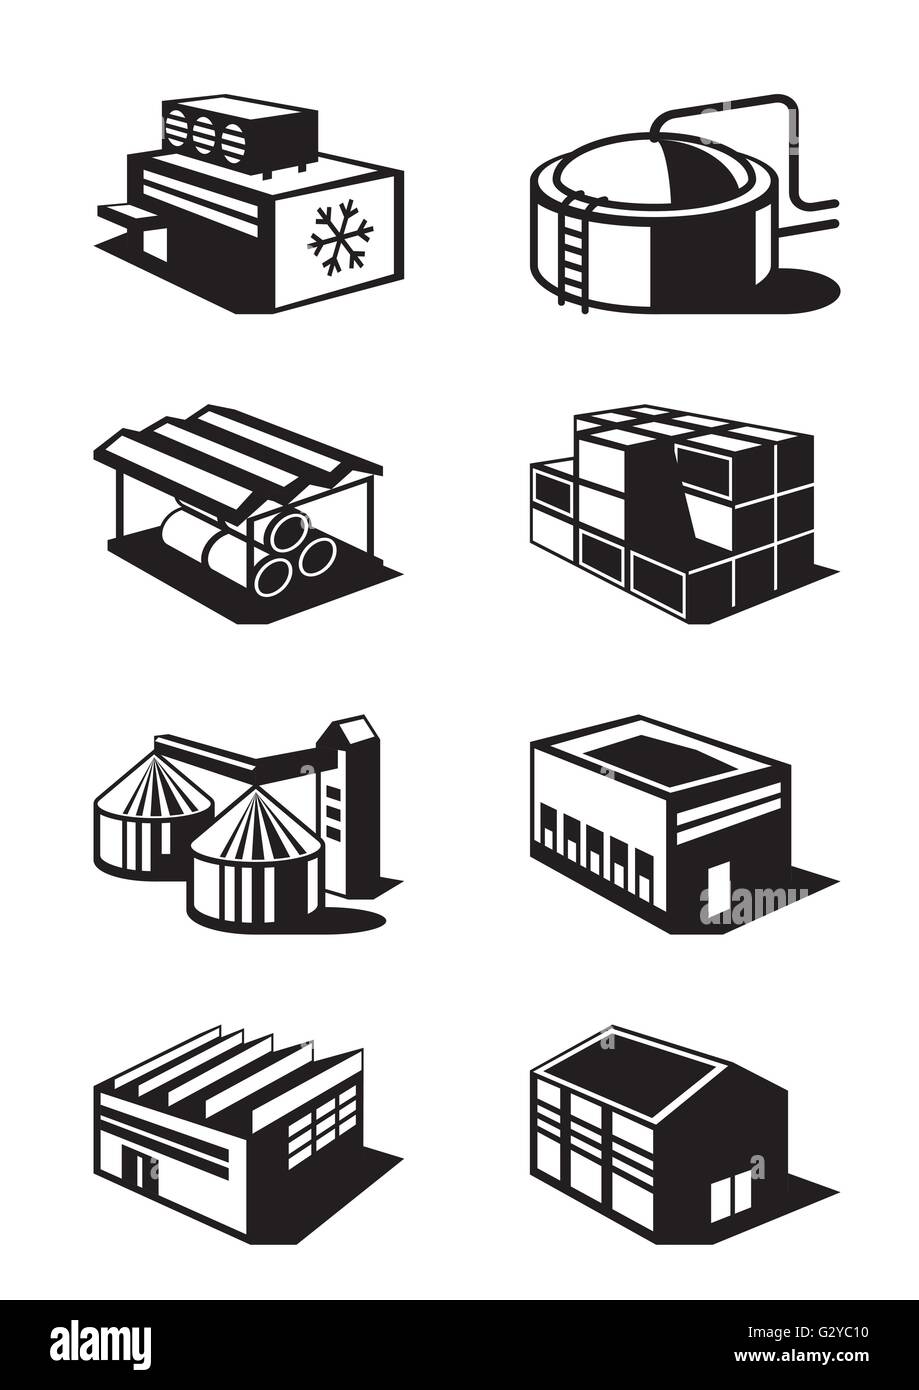 Industrial and commercial warehouses - vector illustration Stock Vector